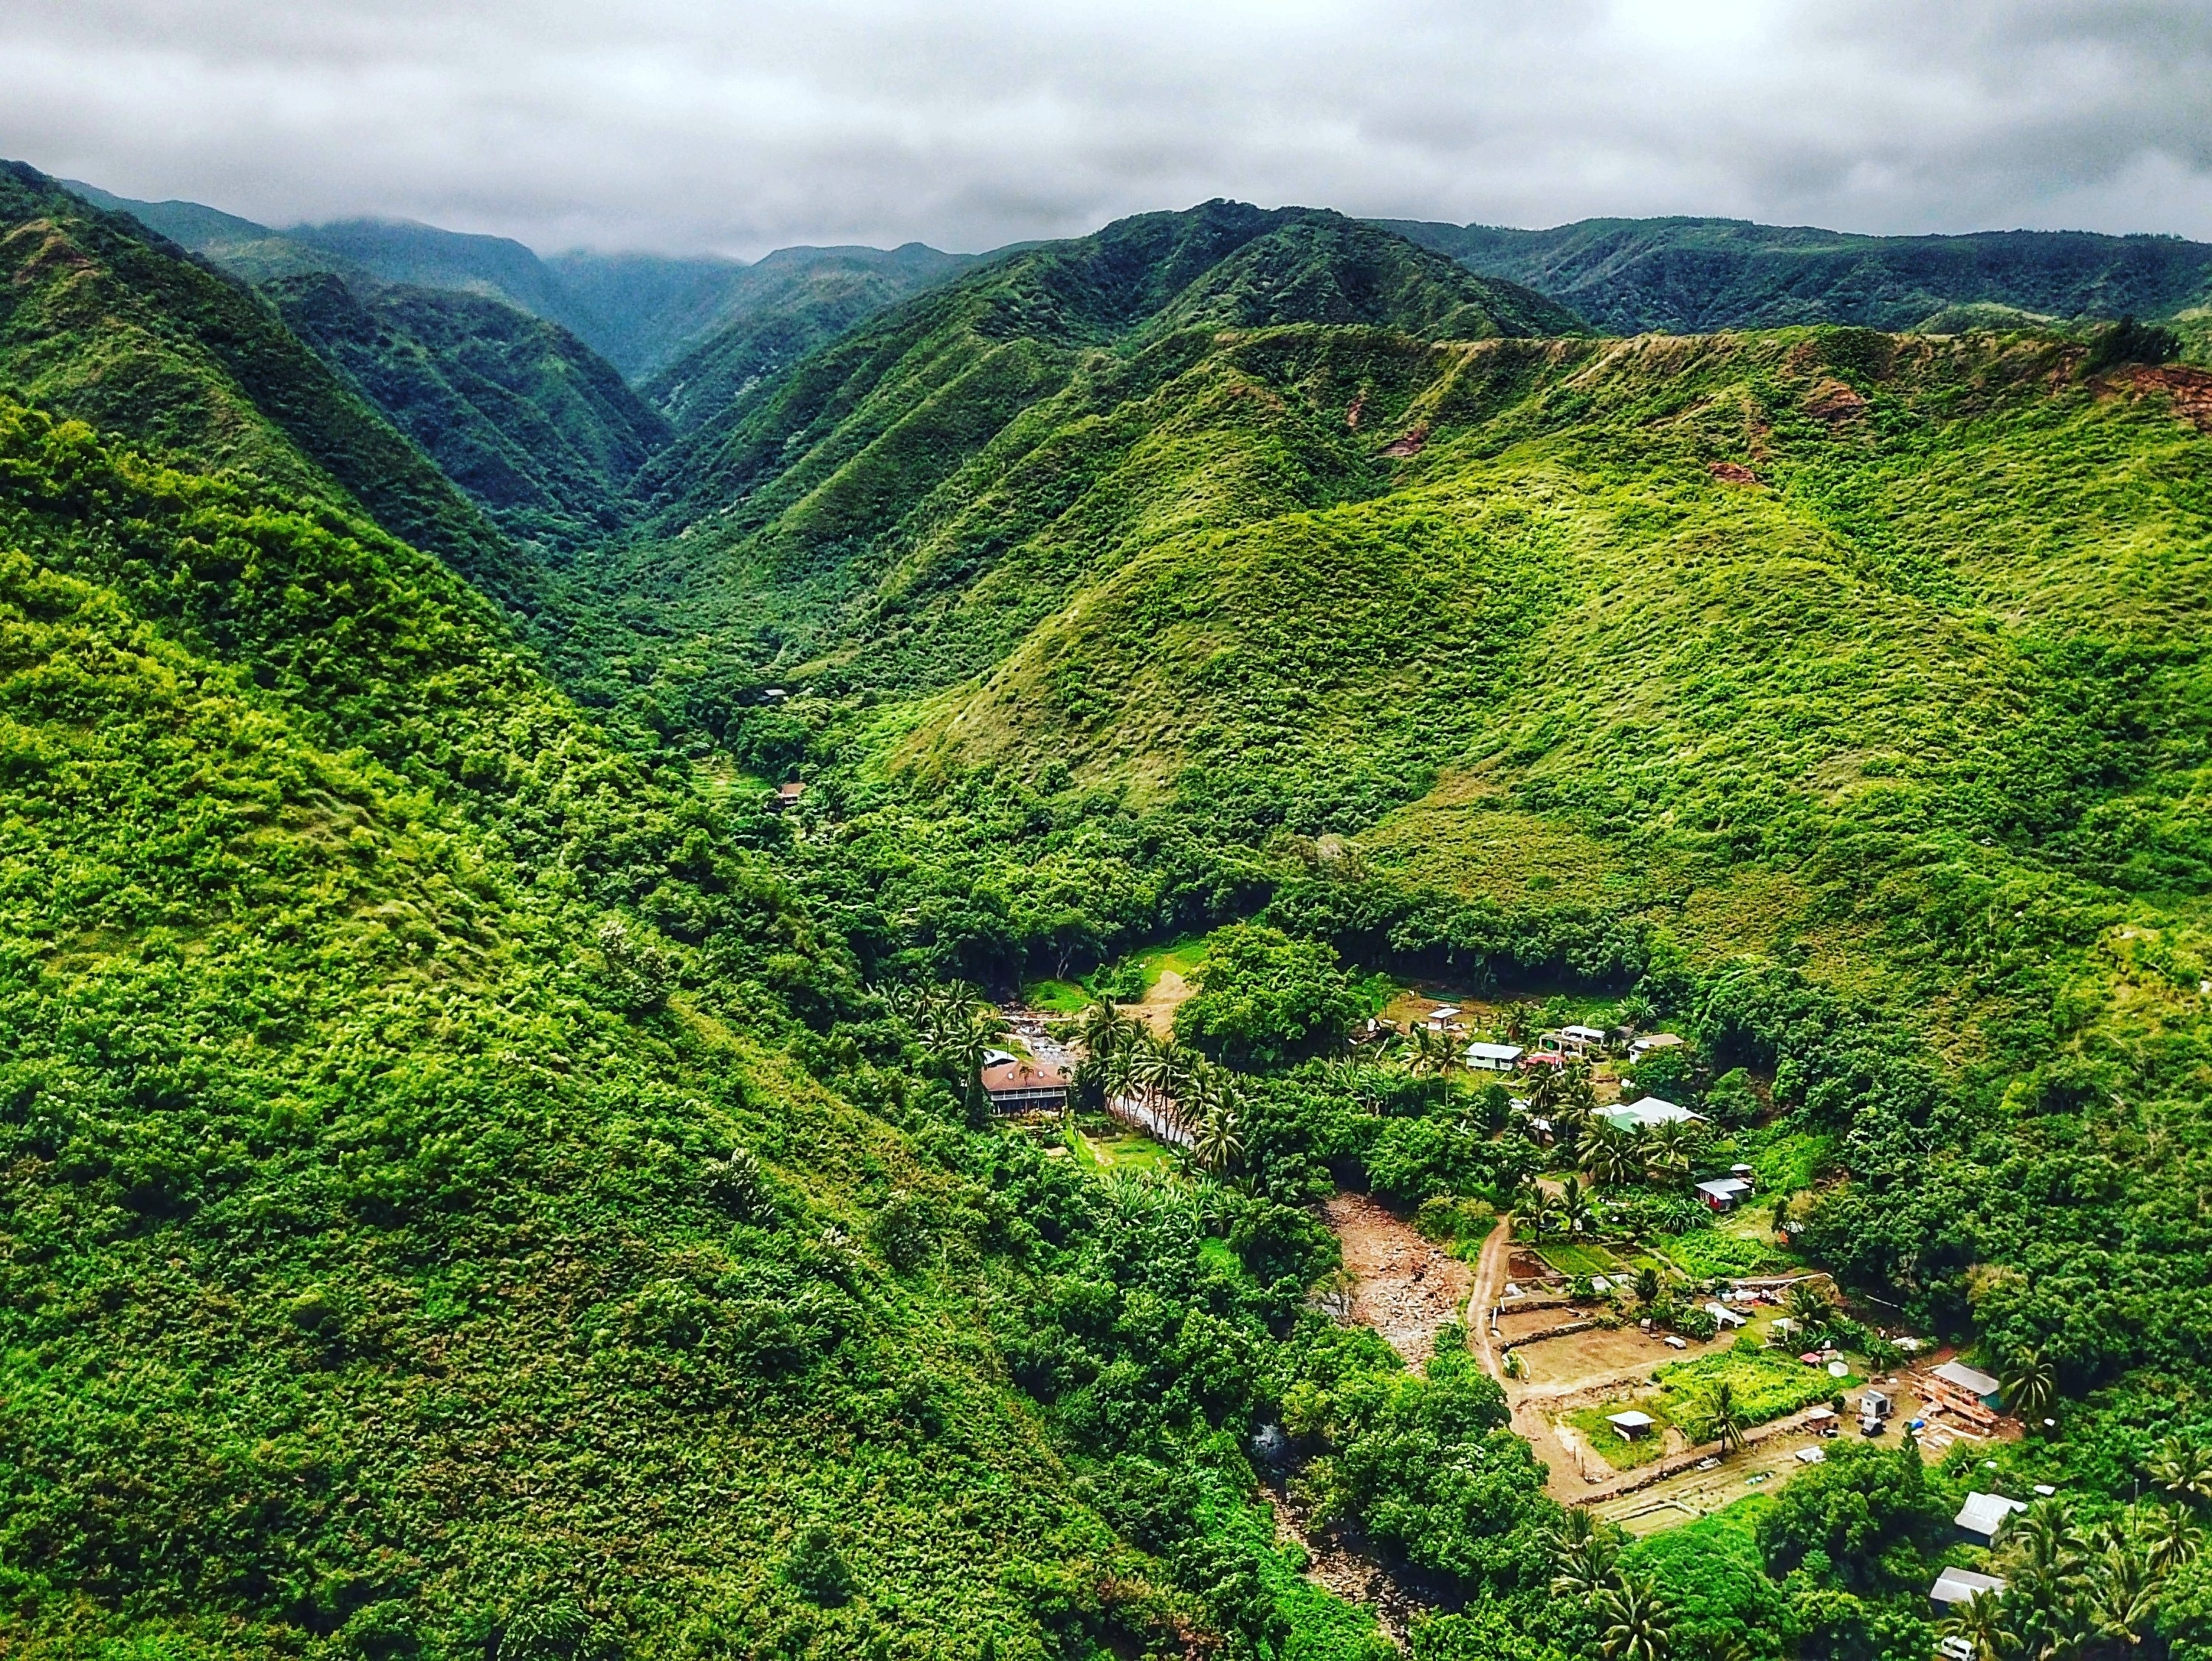 Drone shot from the coast looking up the canyon and over the village. The is one the NE road to the blowhole in Maui